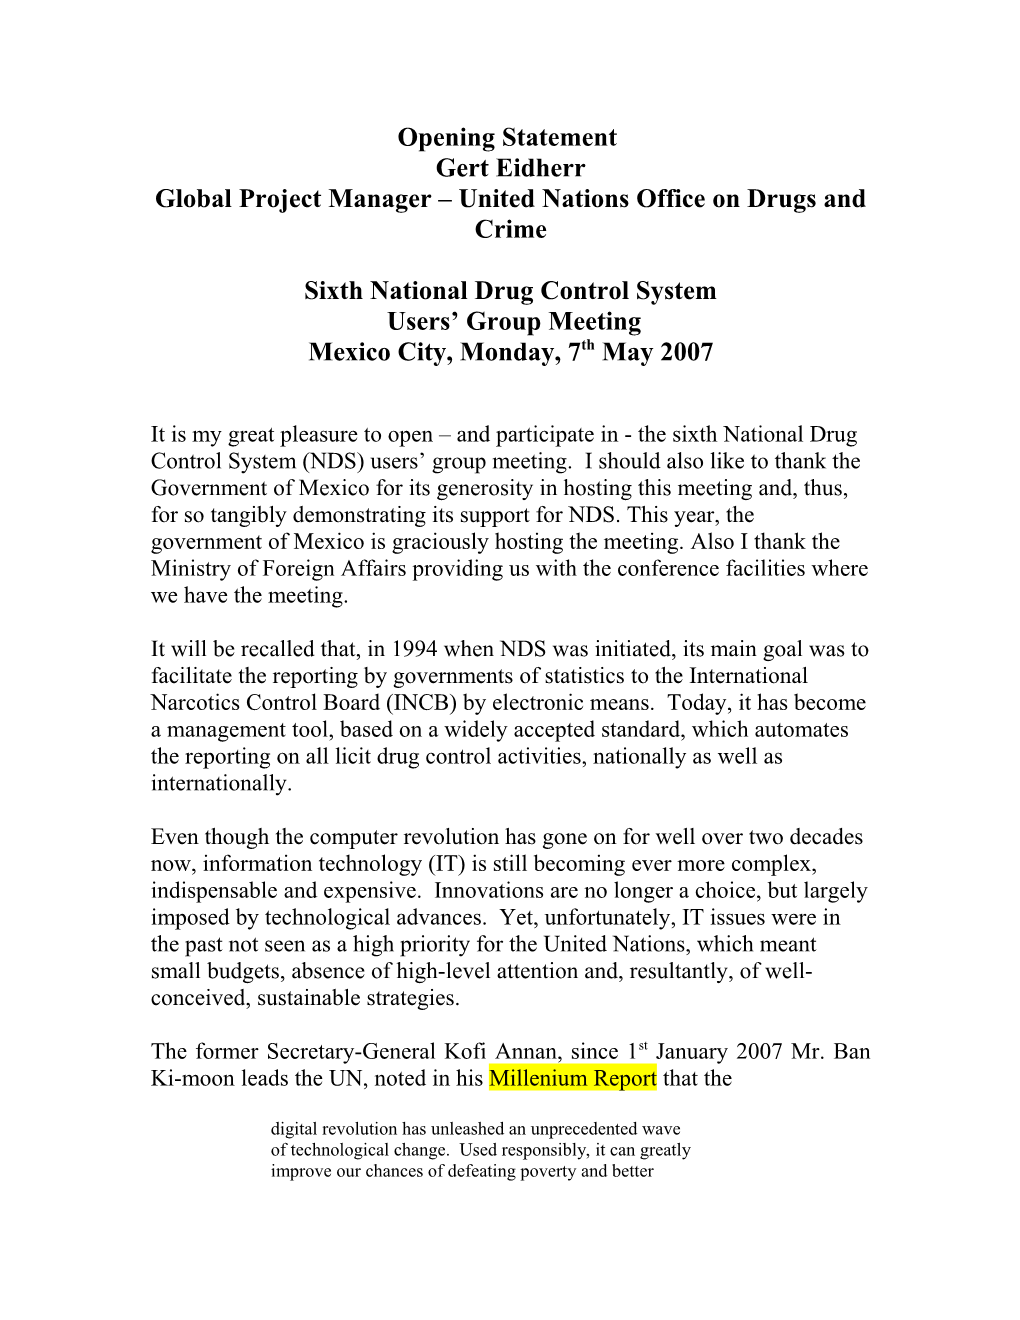 Global Project Manager United Nations Office on Drugs and Crime